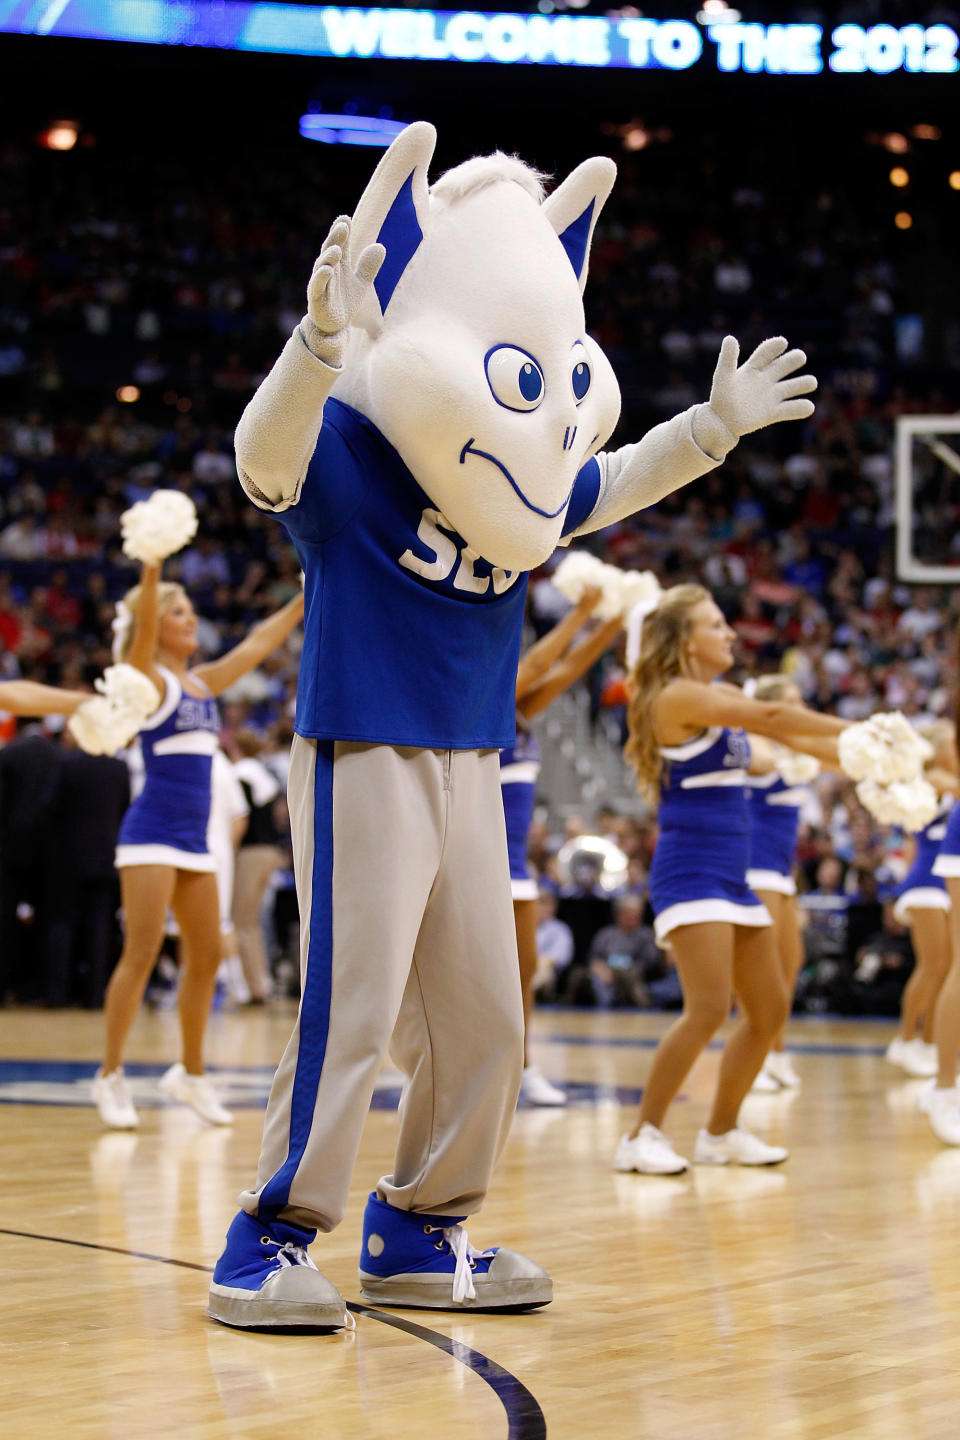 COLUMBUS, OH - MARCH 16: The Saint Louis Billikens mascot walks on the court during a stoppage in play against the Memphis Tigers during the second round of the 2012 NCAA Men's Basketball Tournament at Nationwide Arena on March 16, 2012 in Columbus, Ohio. (Photo by Rob Carr/Getty Images)